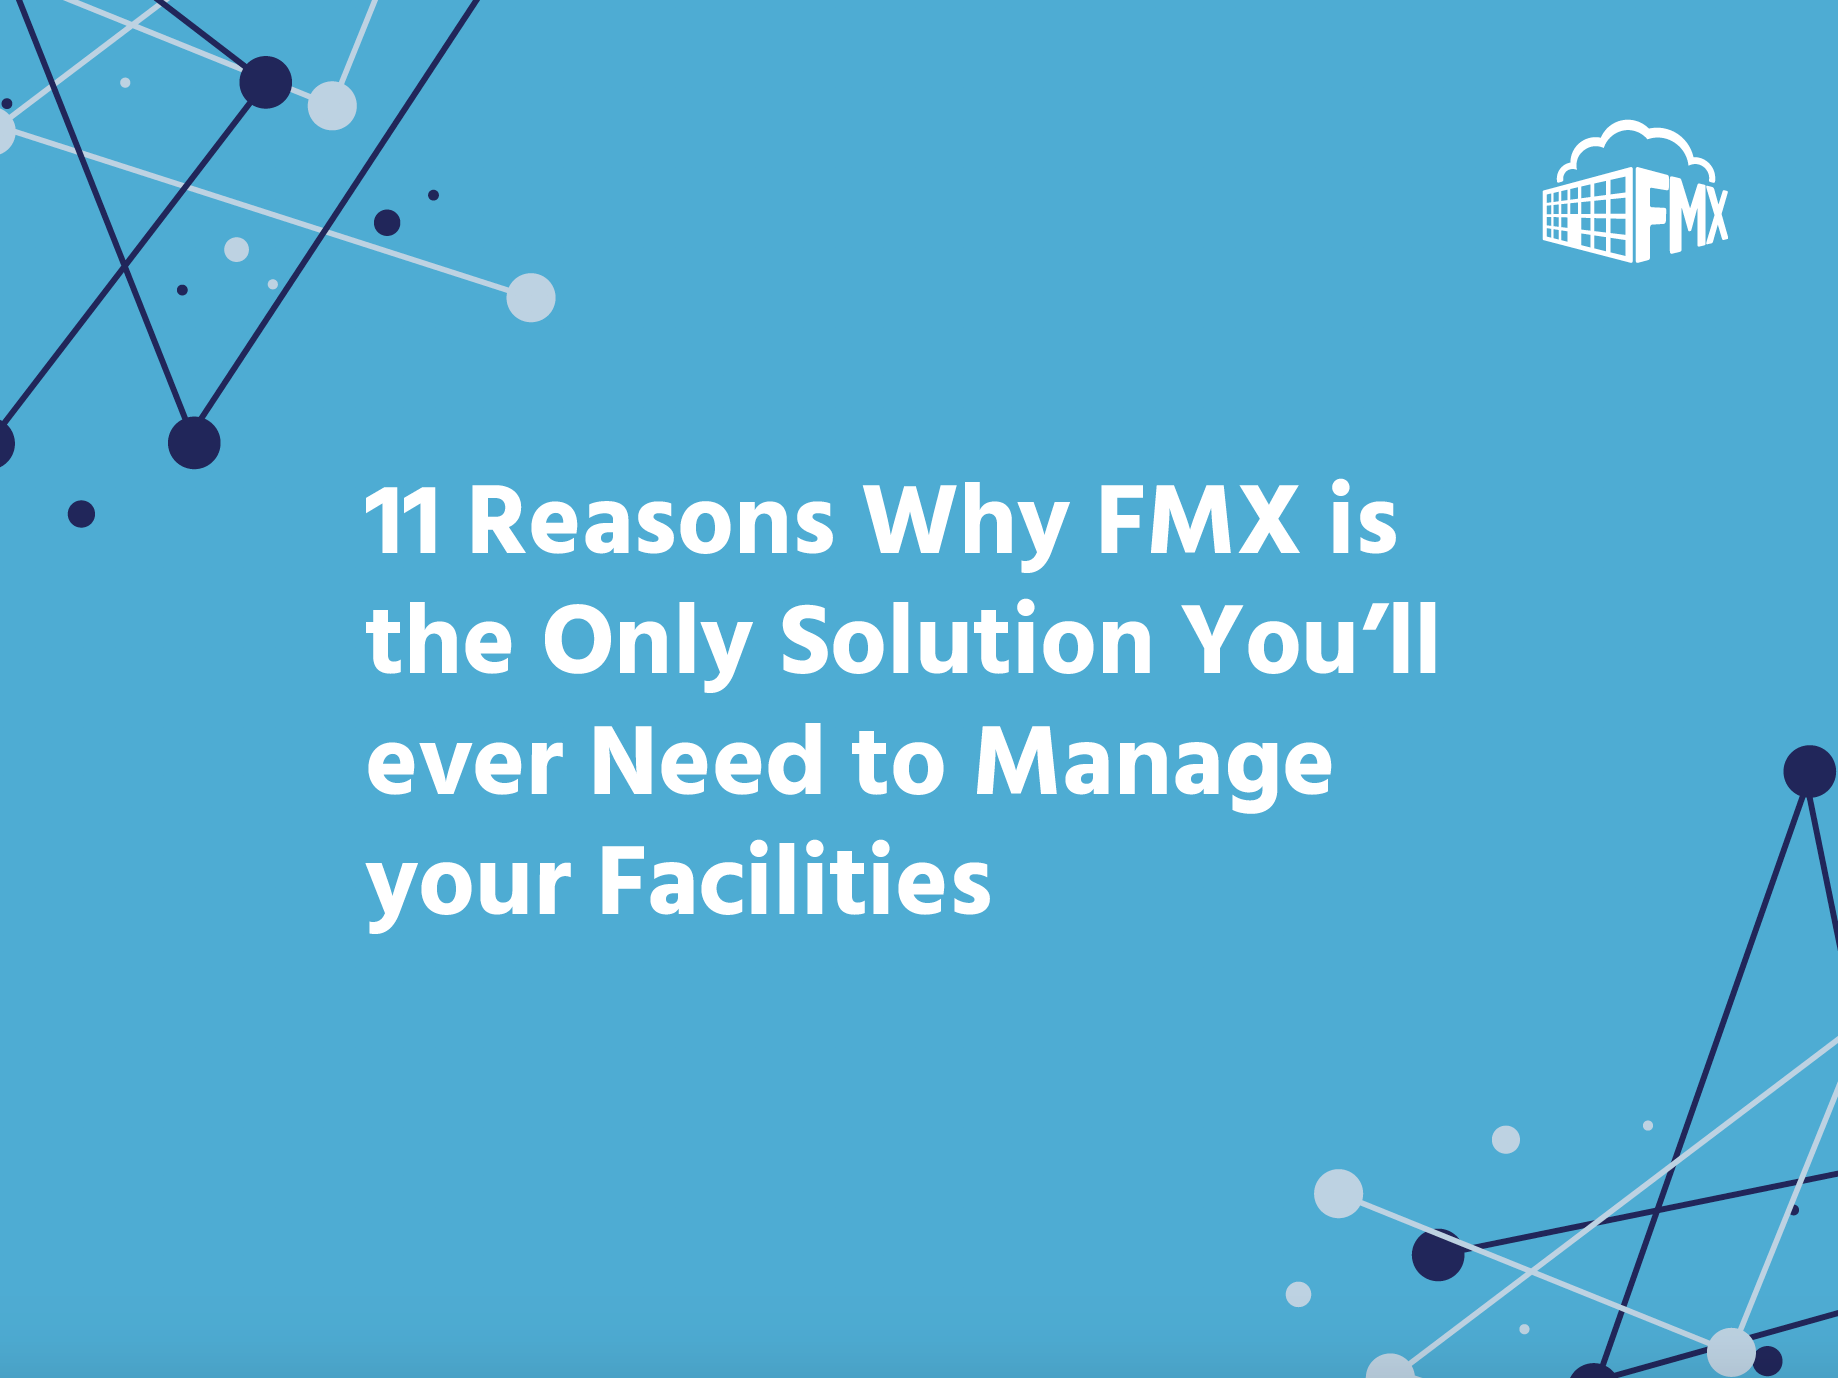 FMX: Your All-in-One Solution for K-12 Facilities Management - FMX